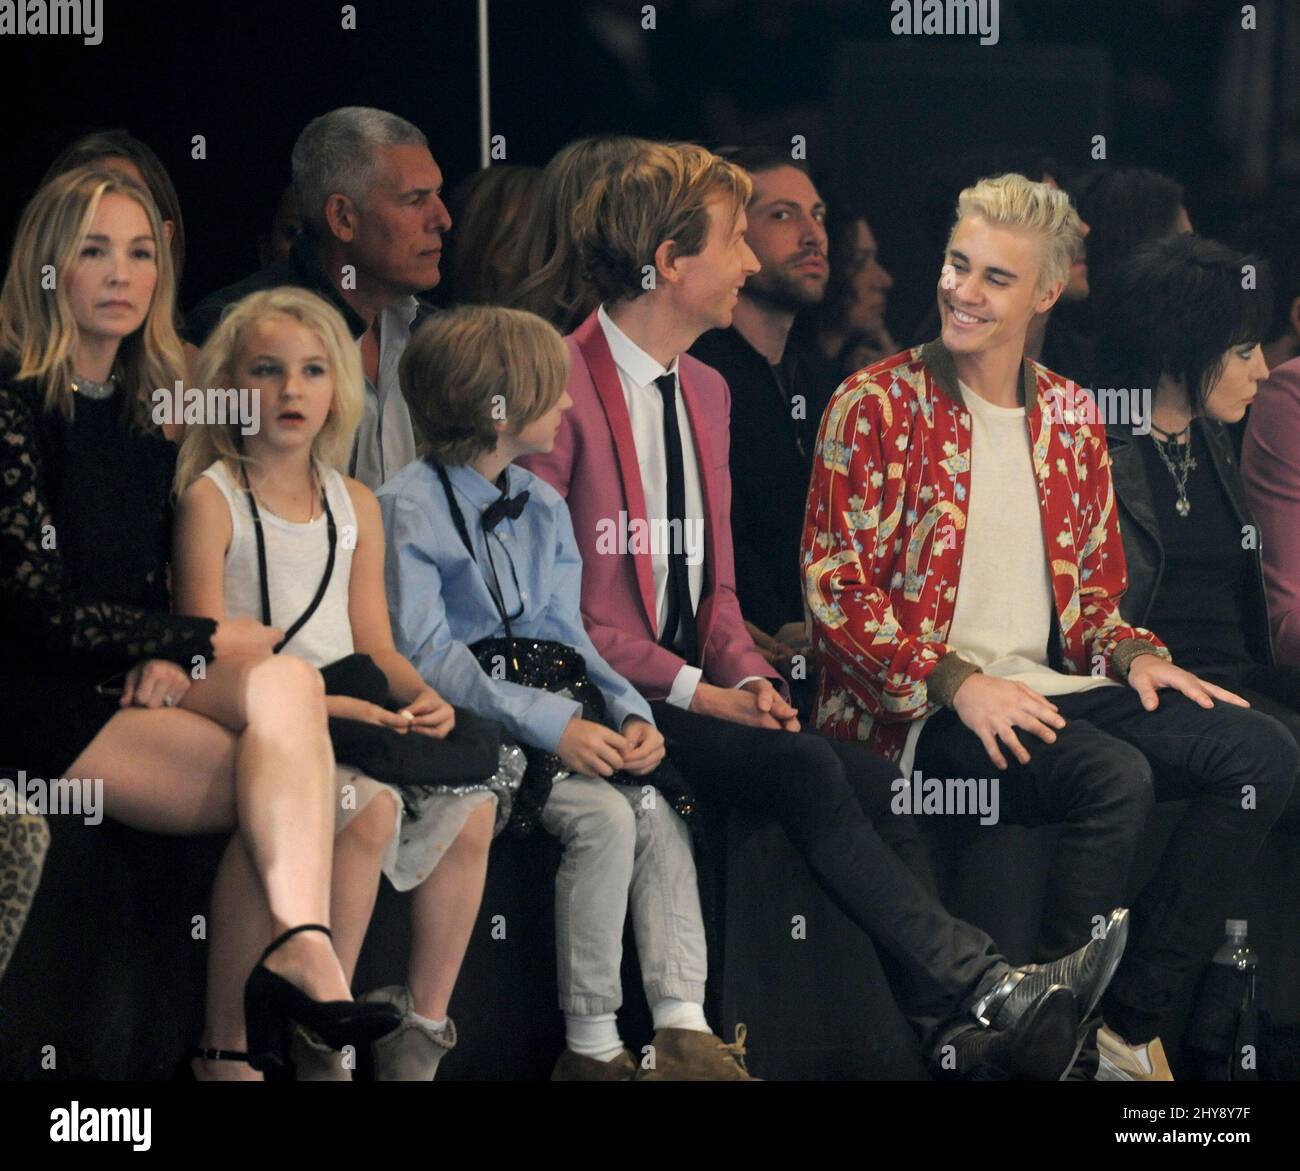 Marissa Ribisi, Tuesday Hansen, Cosimo Henri Hansen, Beck and Justin Bieber attending front row of the Saint Laurent show held at the Hollywood Palladium in Los Angeles, California. Stock Photo